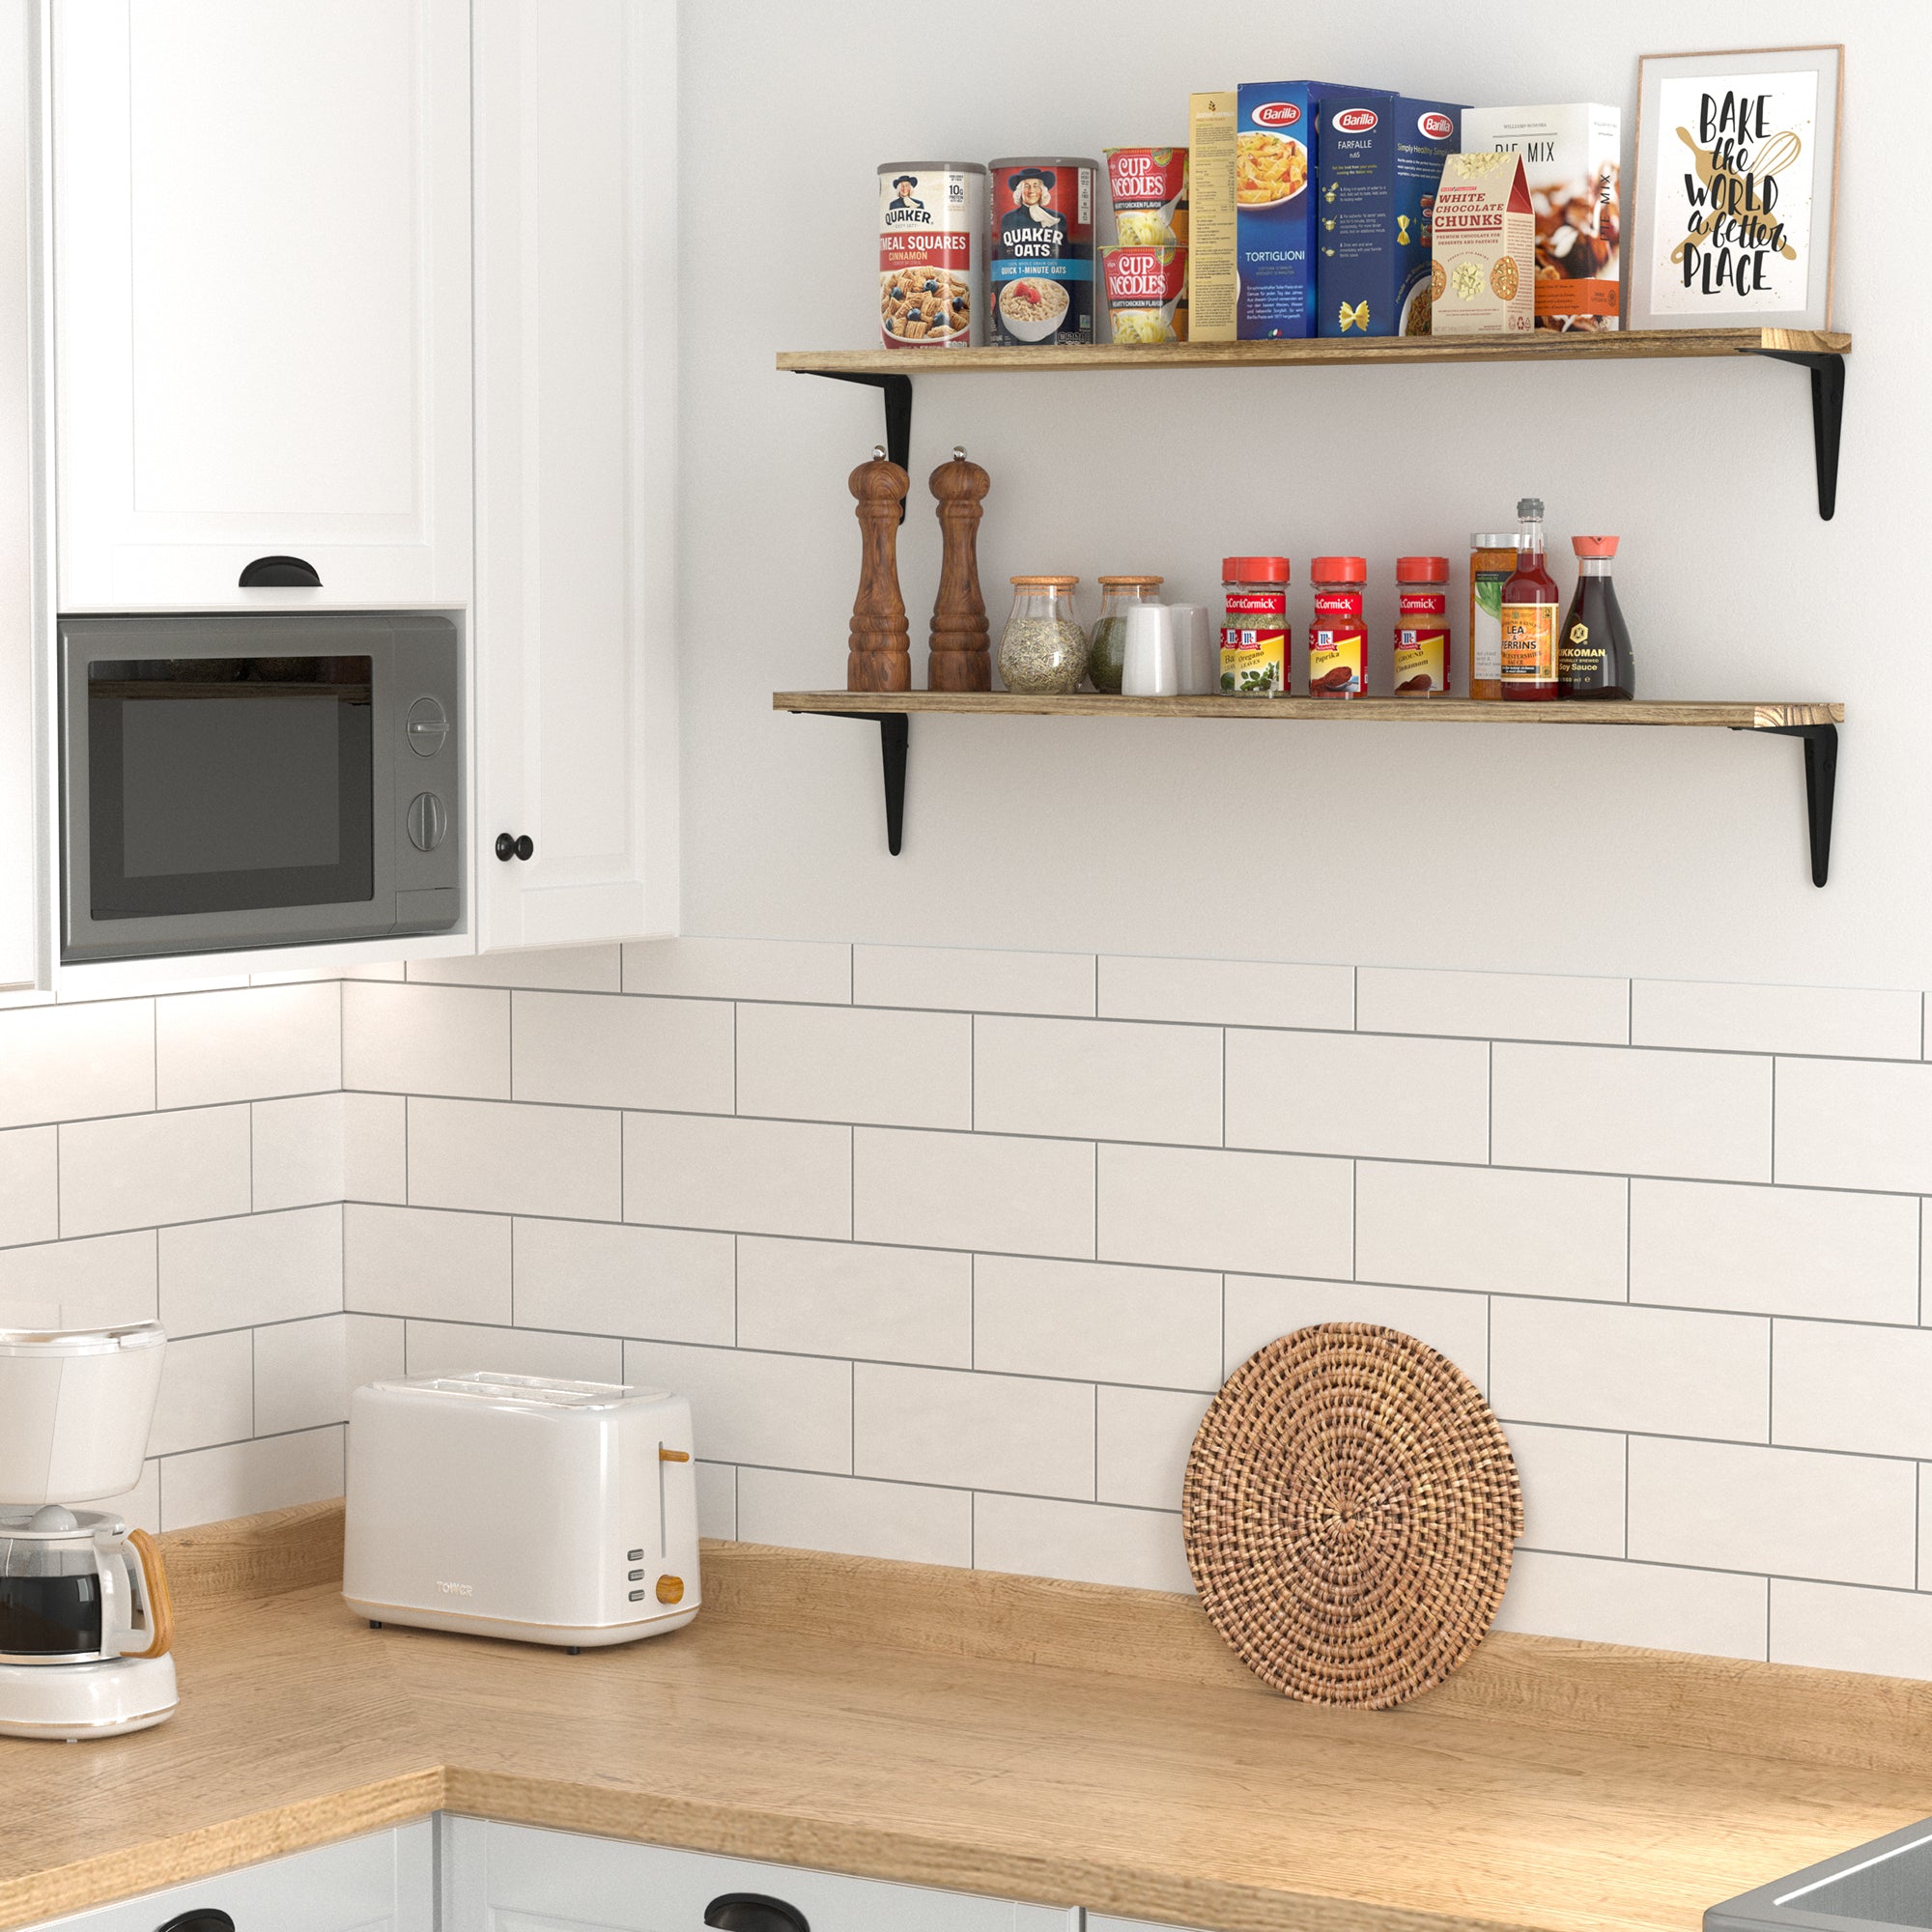 Kitchen setting with kitchen storage shelves burnt displaying food items, kitchen tools, and decorative sign.